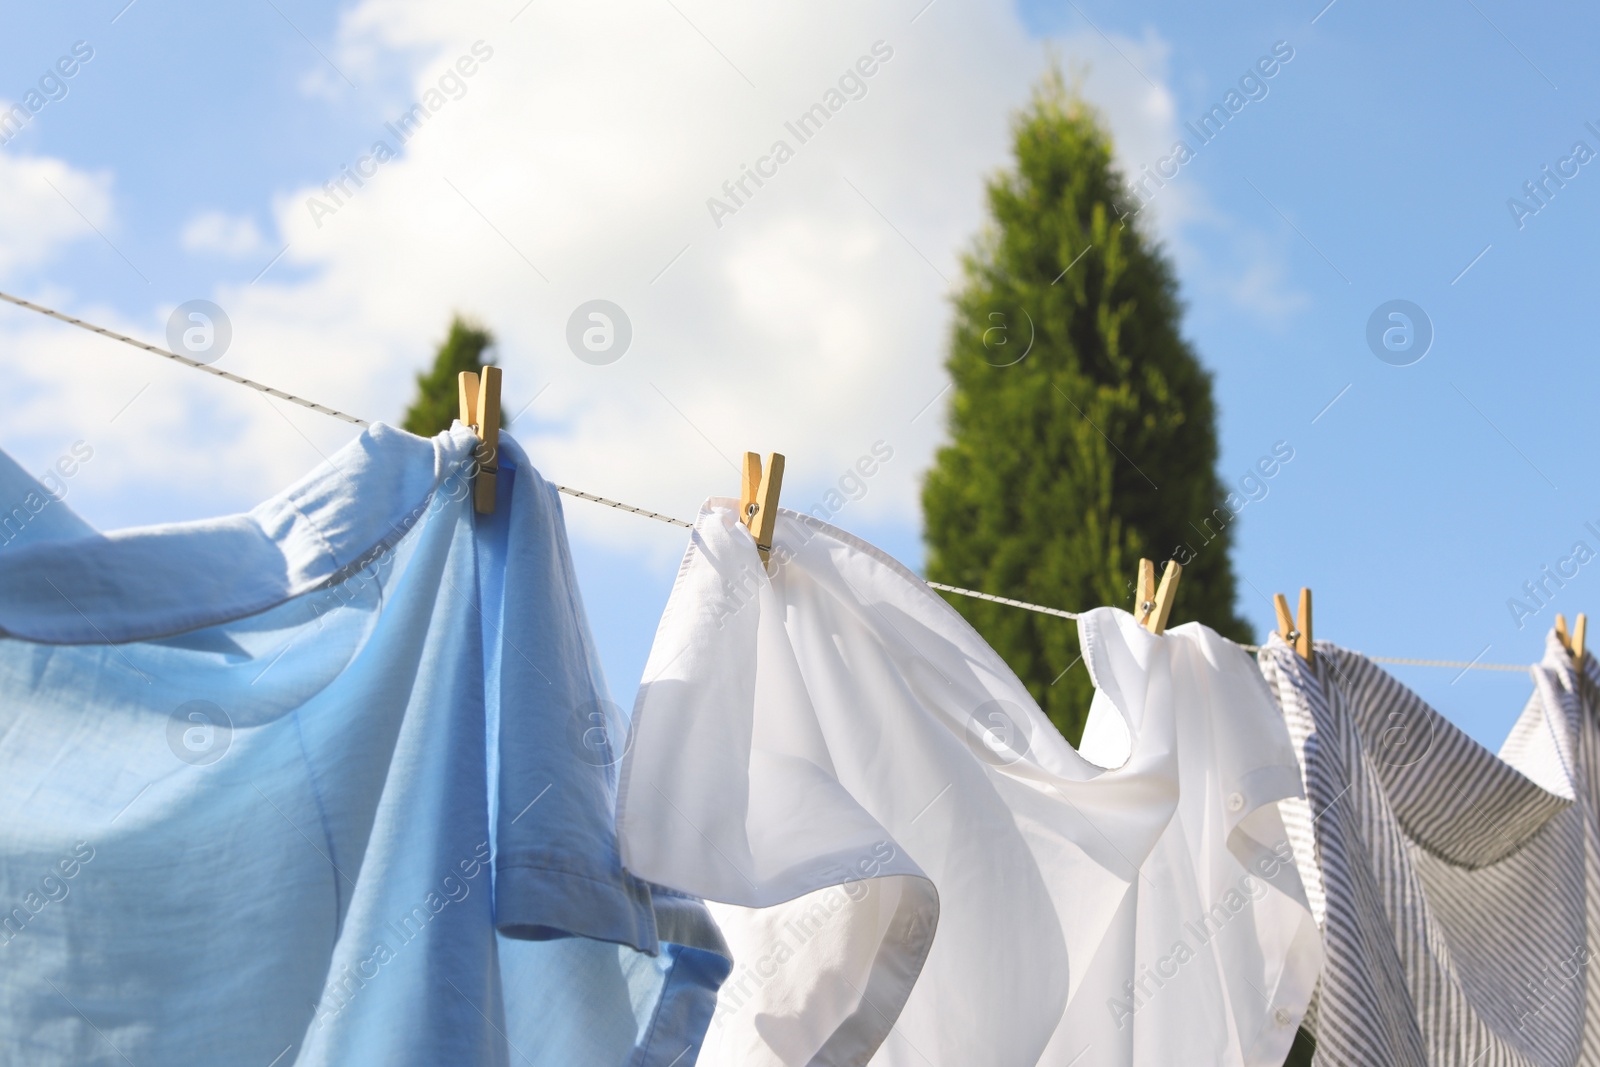 Photo of Clean clothes hanging on washing line outdoors, closeup. Drying laundry